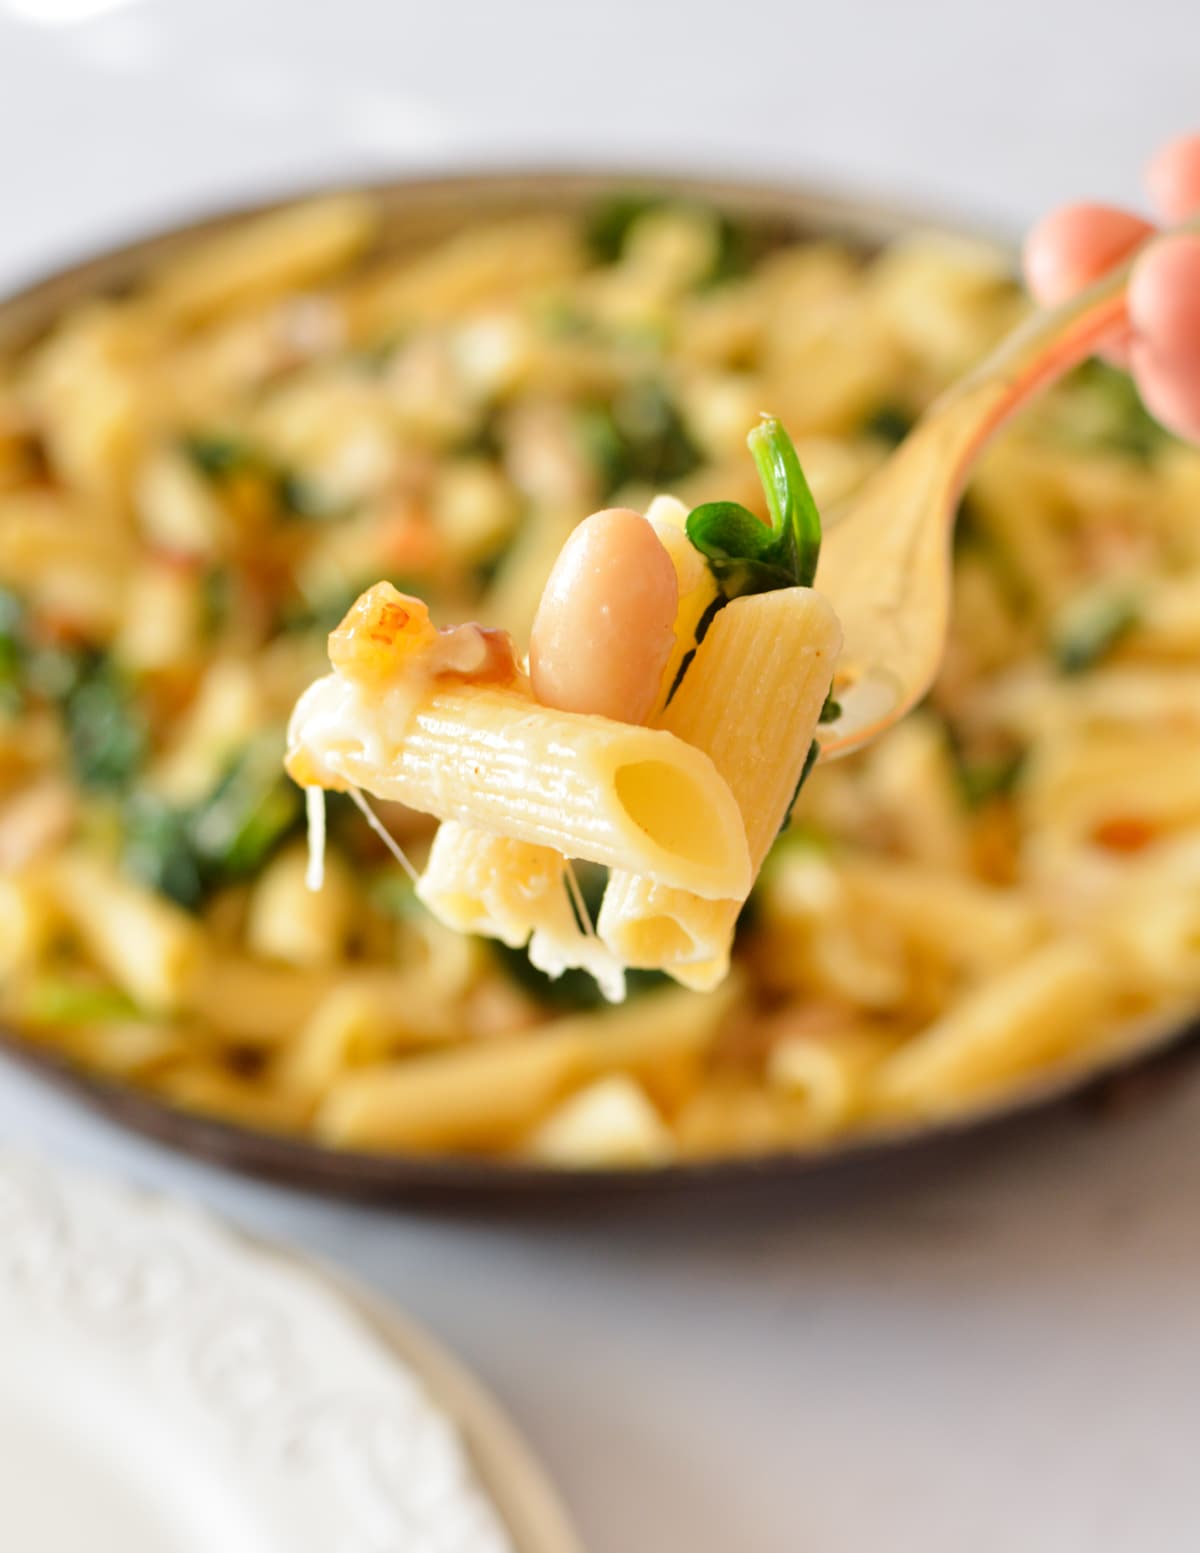 a bite of spinach pasta with parmesan.